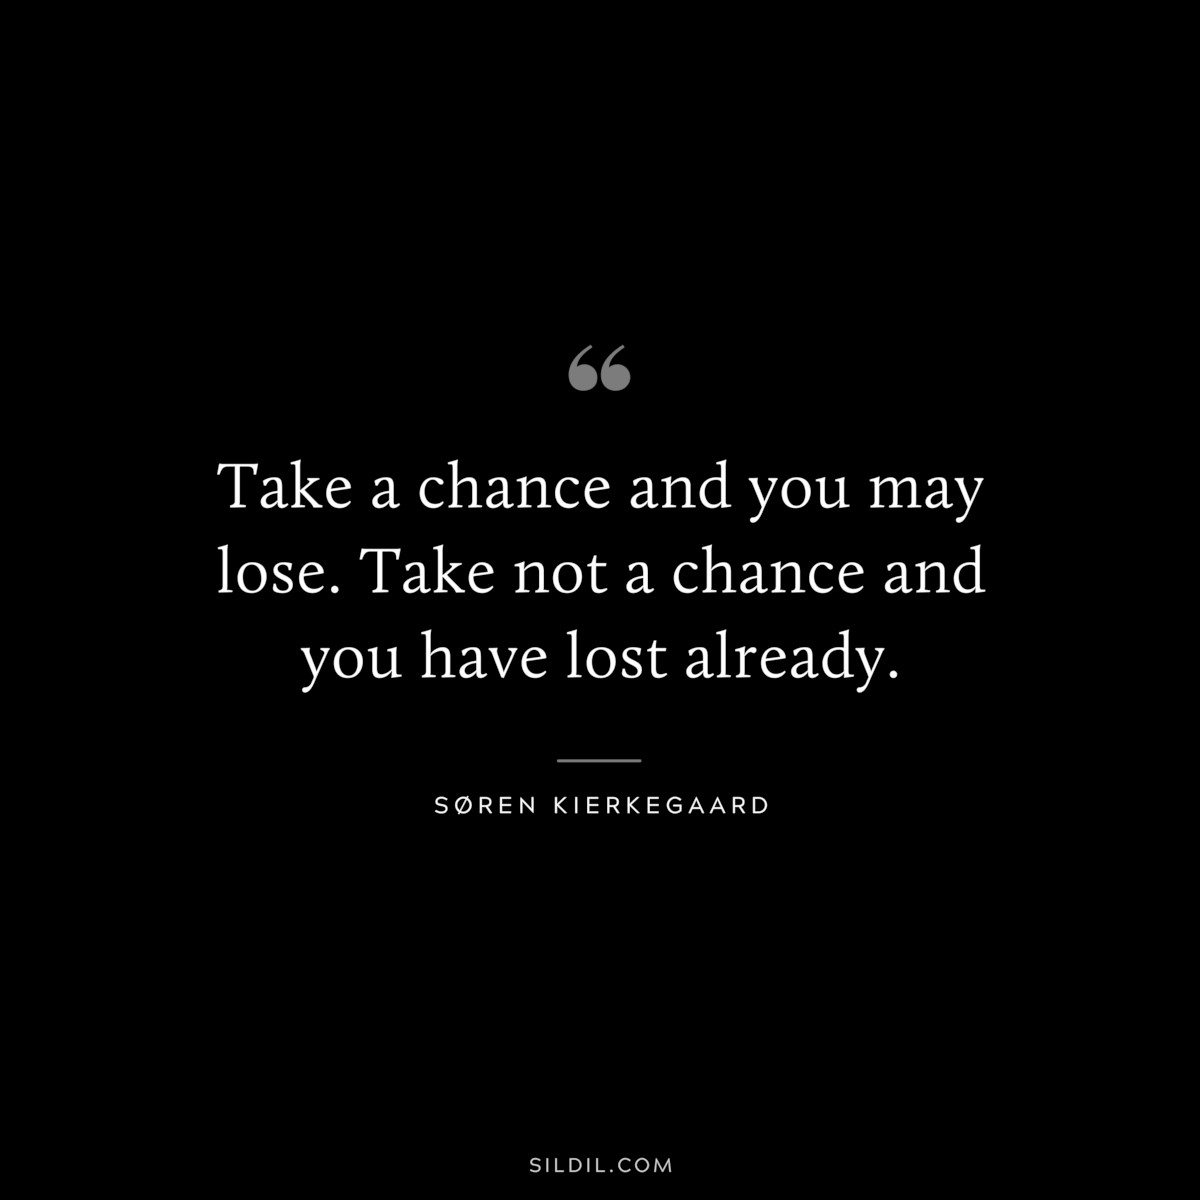 Take a chance and you may lose. Take not a chance and you have lost already. ― Søren Kierkegaard